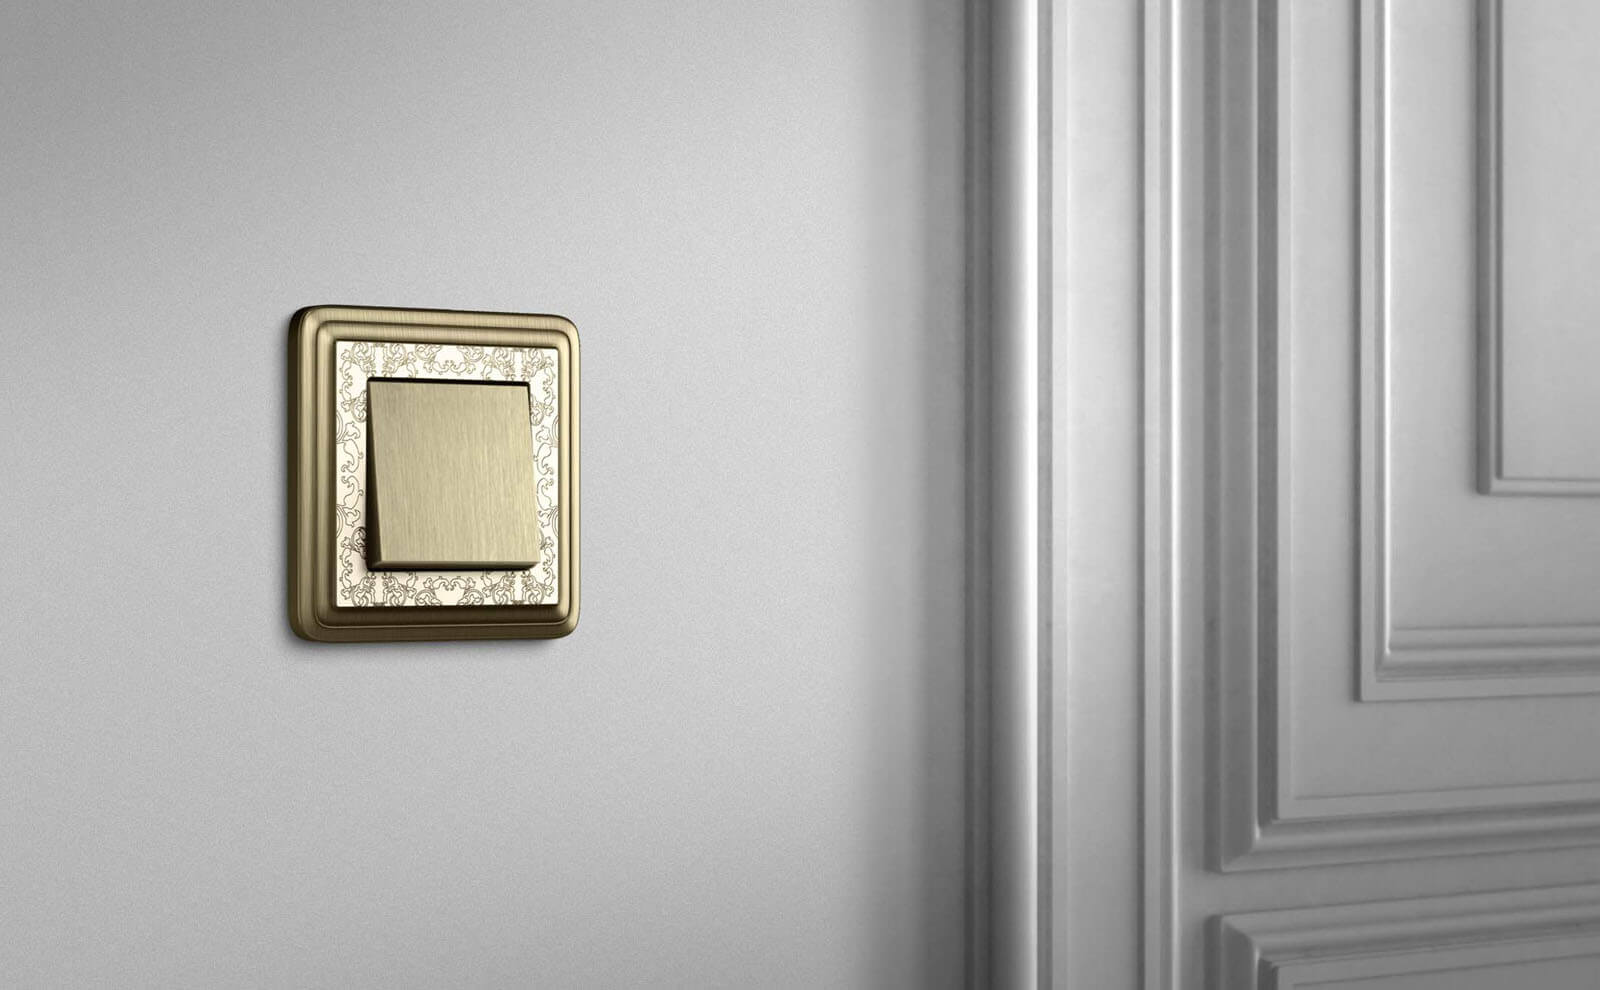 Add a touch of glamour to your home with switches and socket outlets from the Gira ClassiX design line.